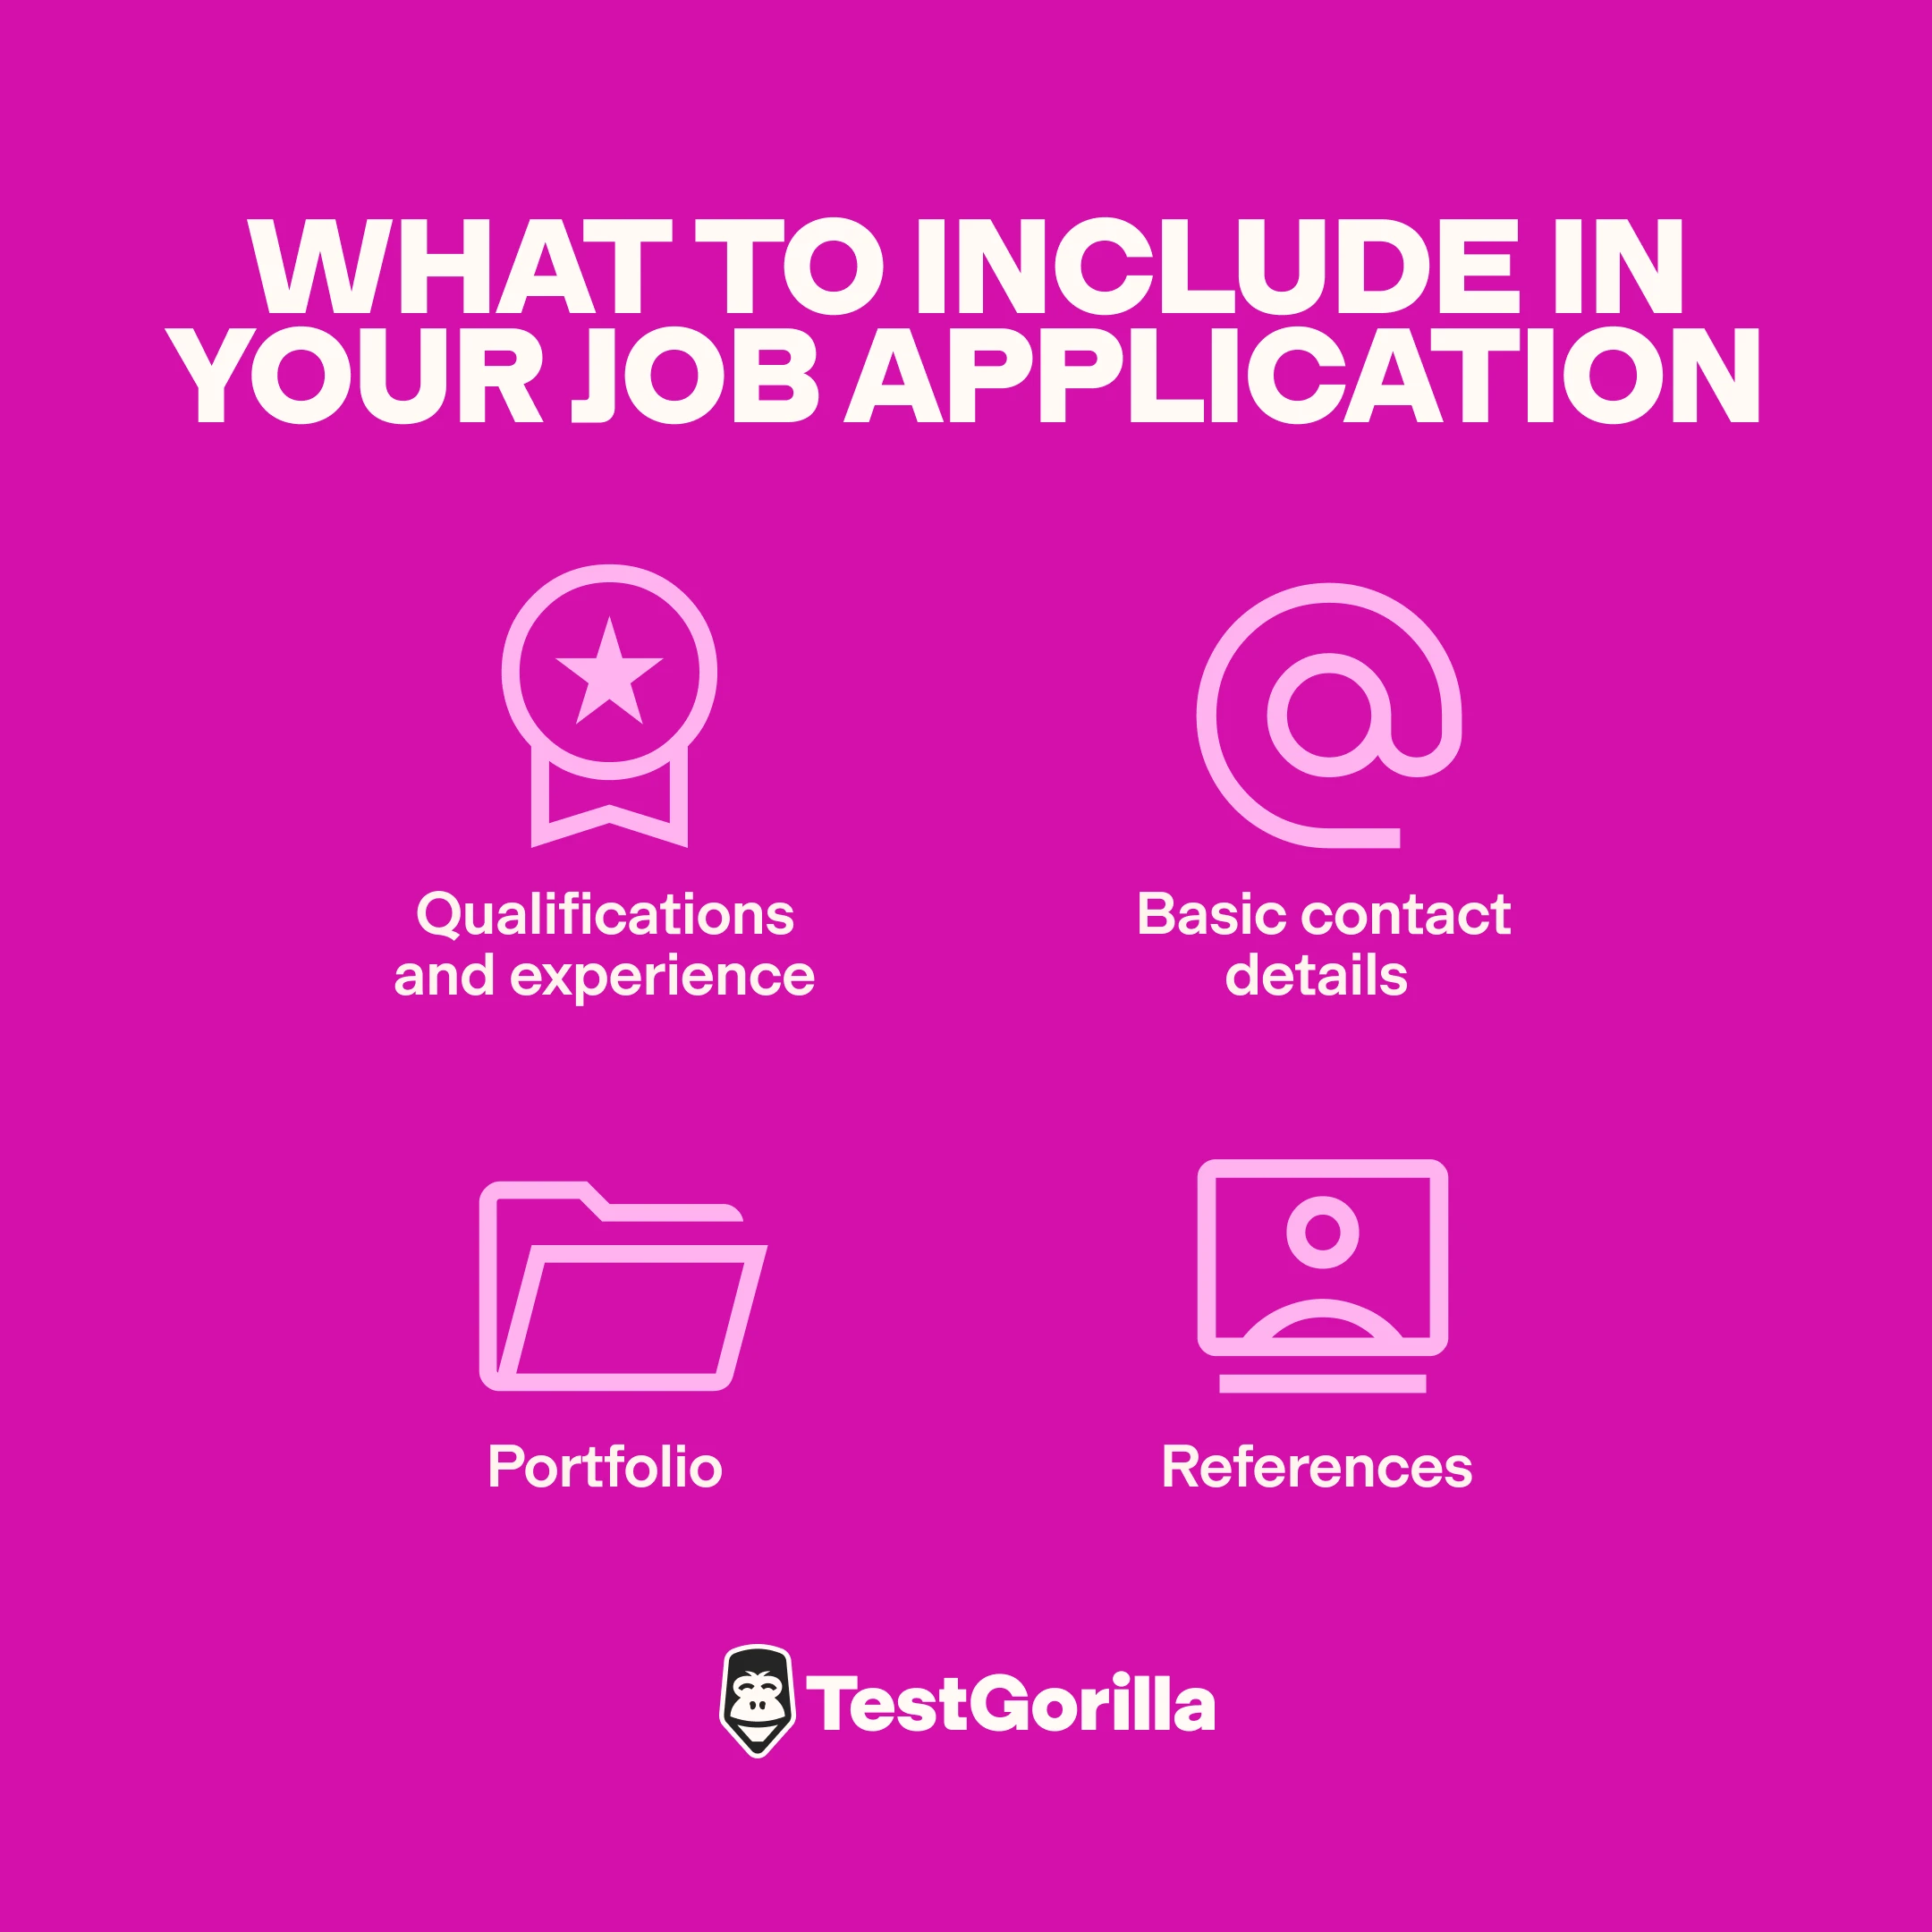 What to include in your job application